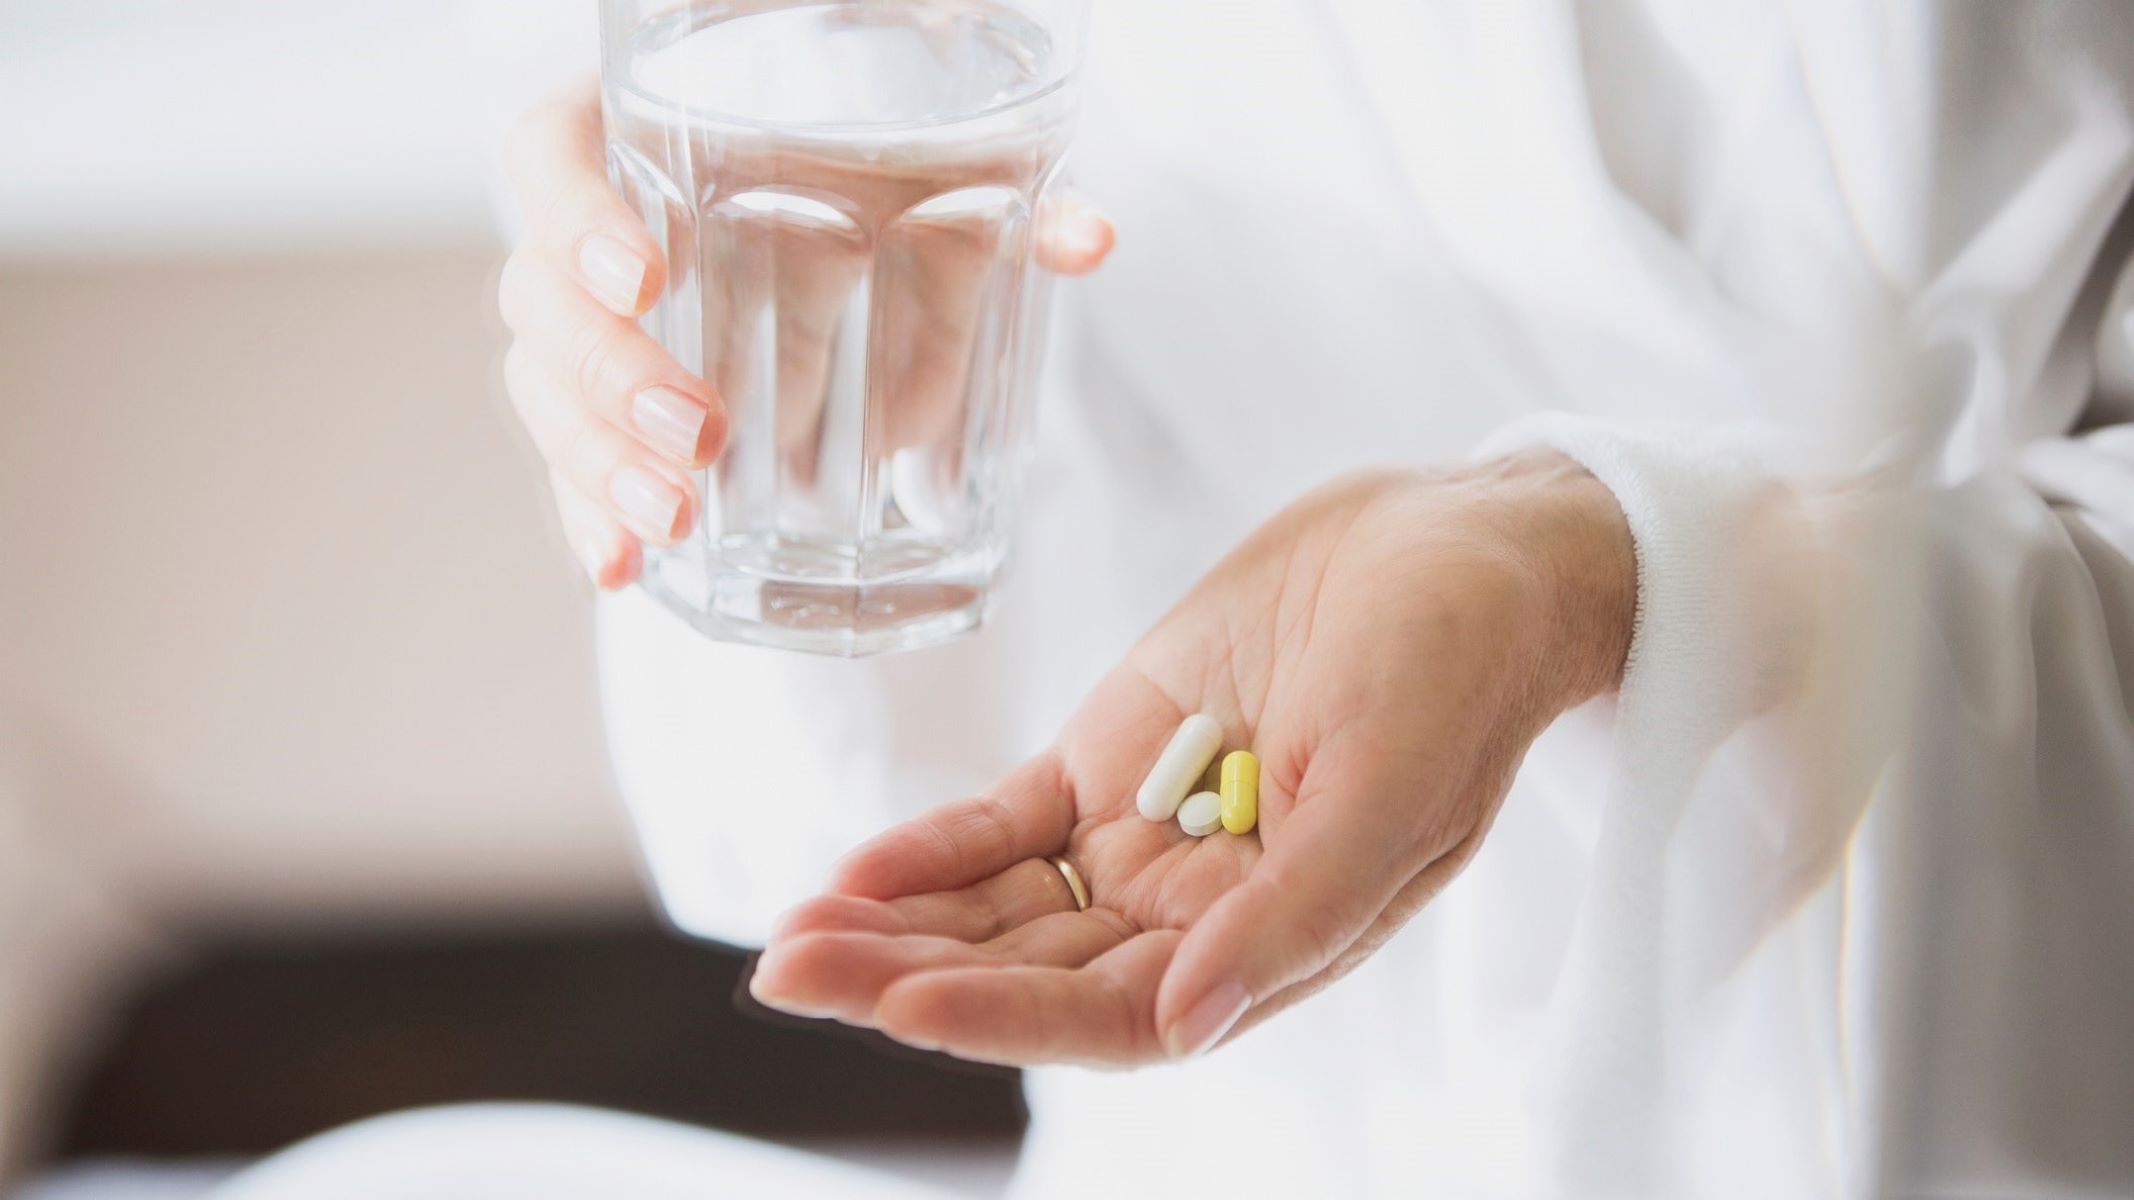 Top Magnesium Supplements For Recovering After A Run